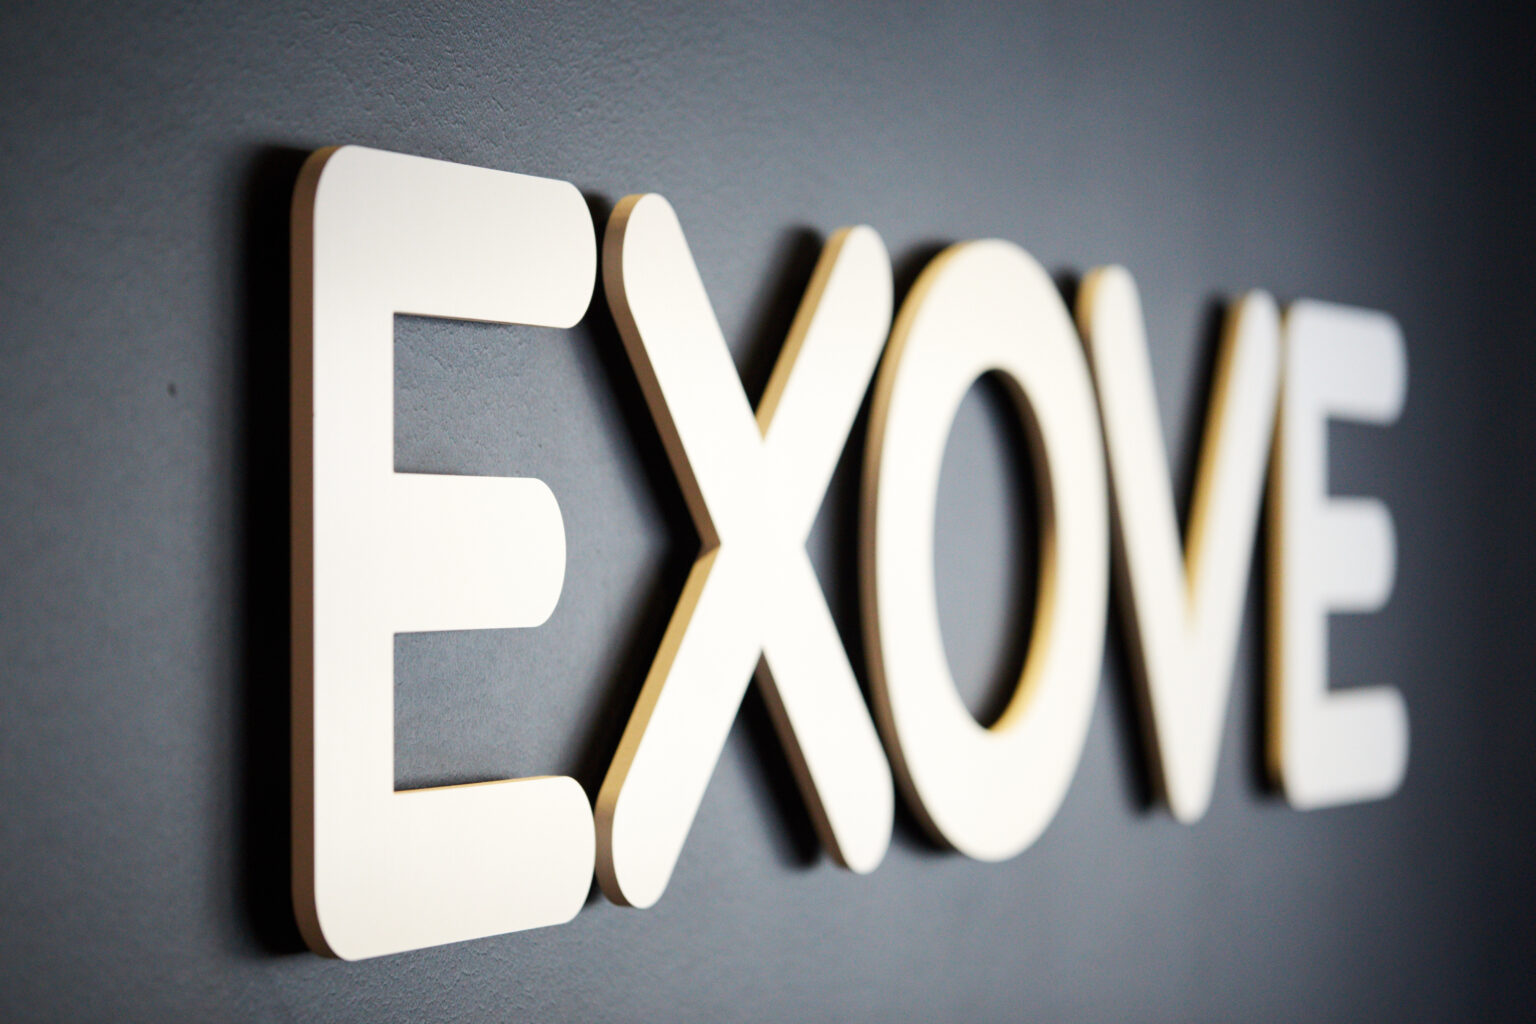 Picture of Exove logo on the wall